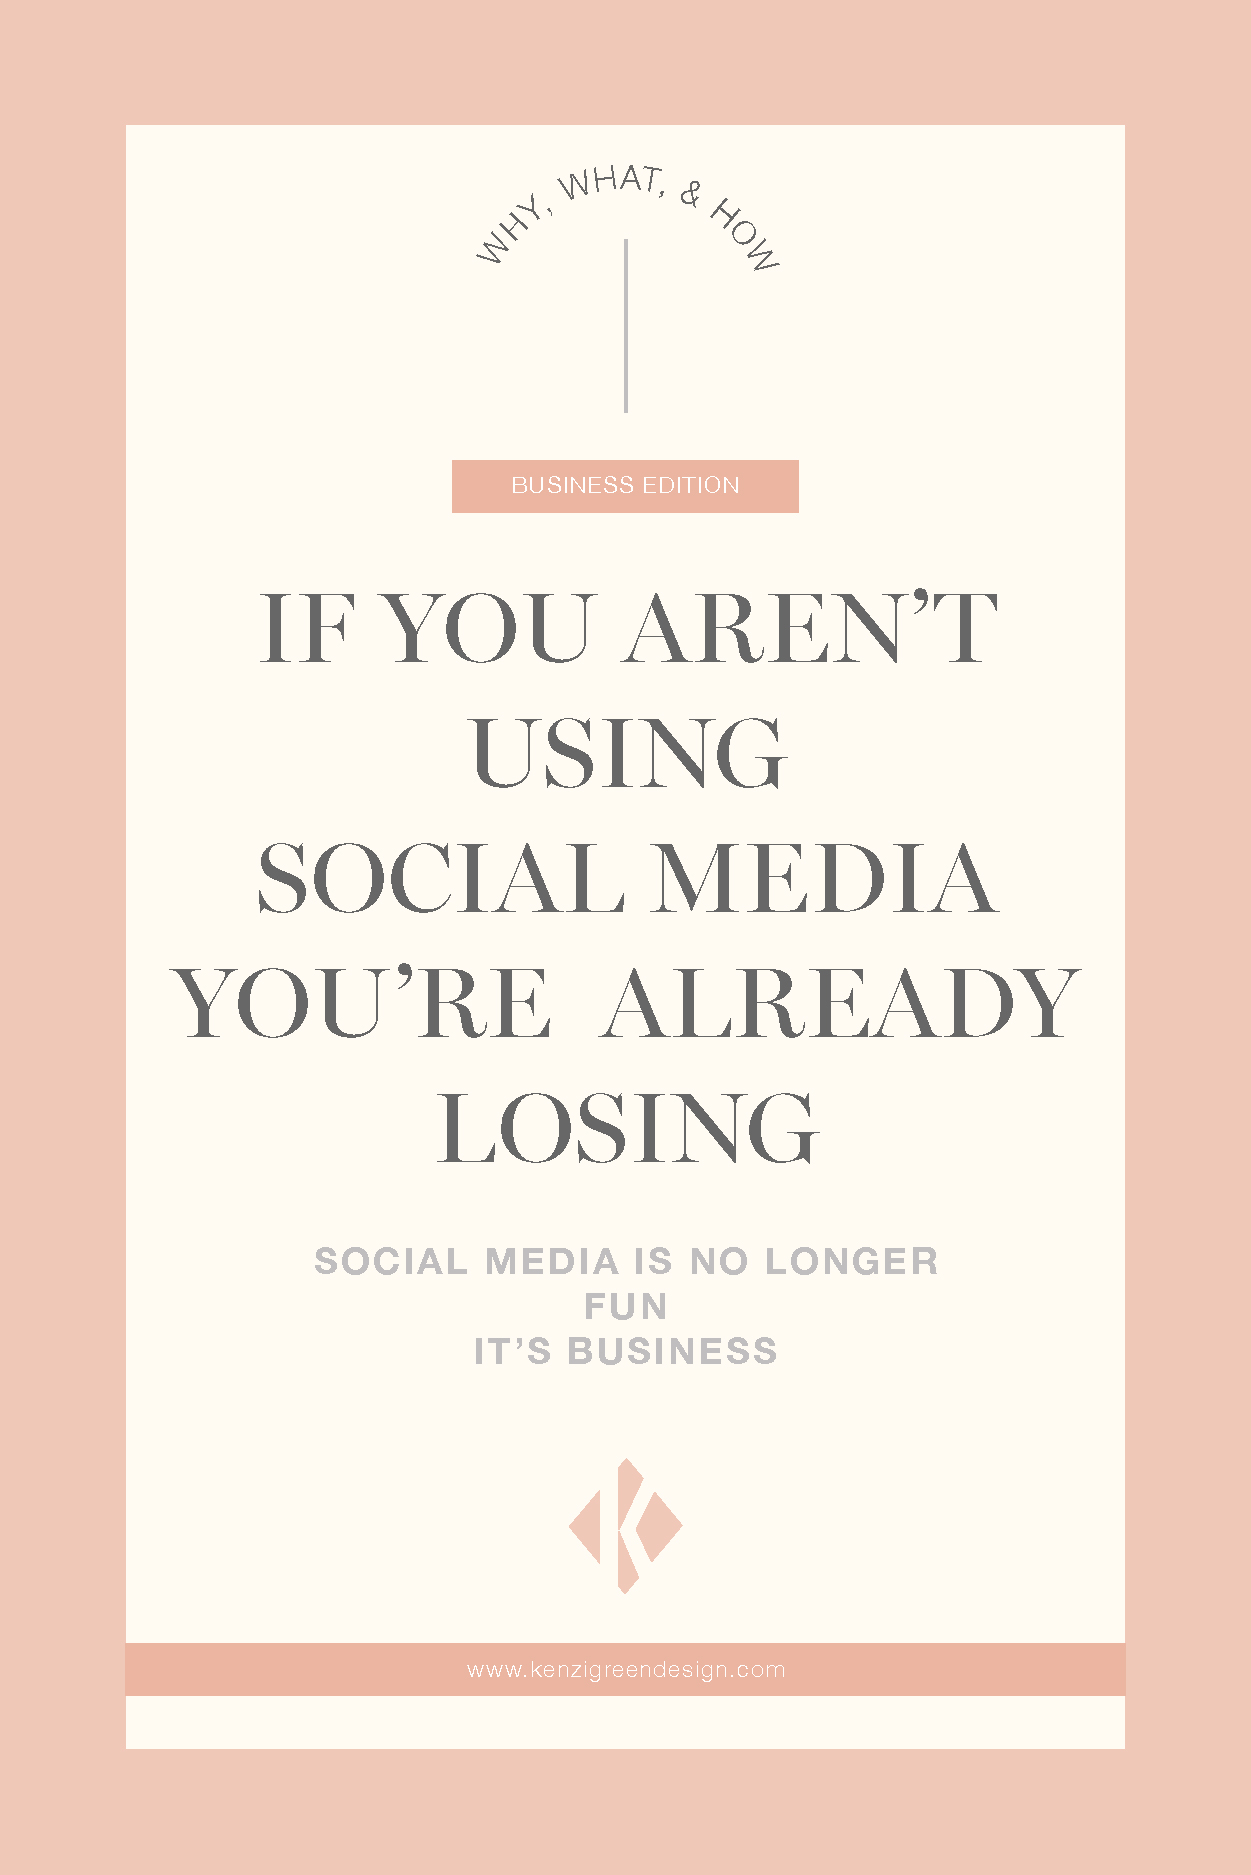 If you aren't using social media you're already losing